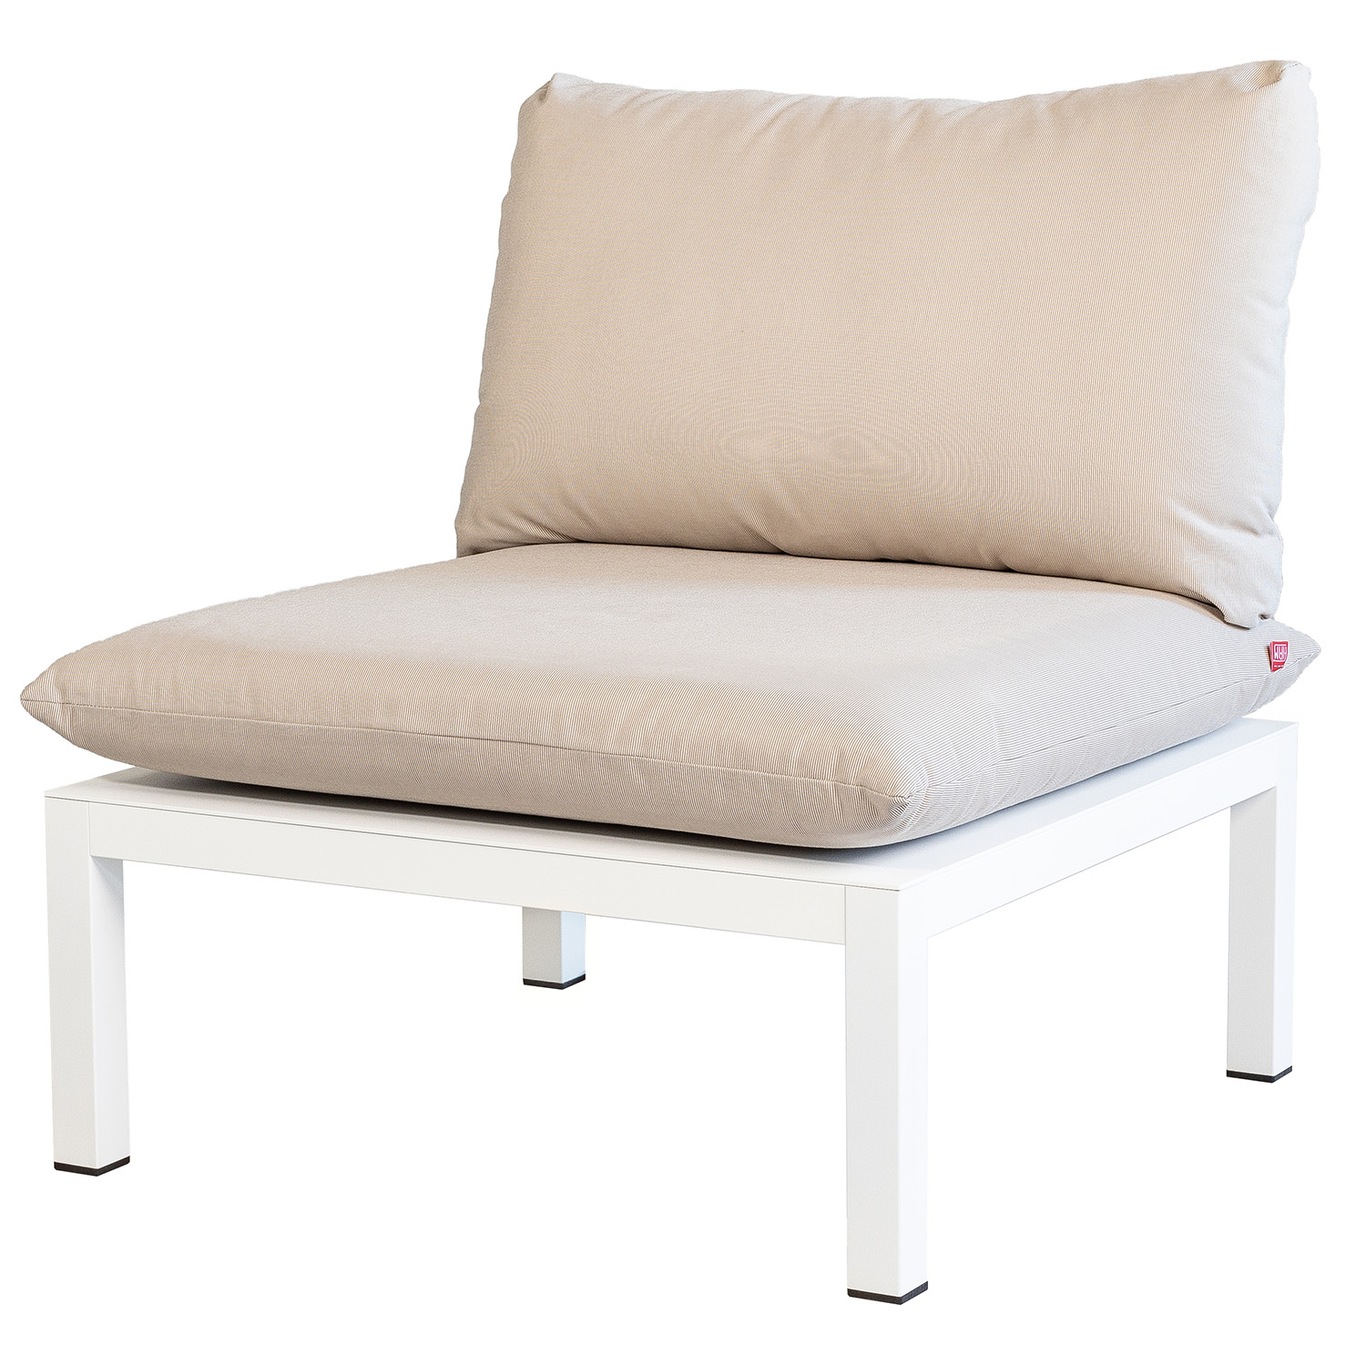 Domino, set of seat and backrest, beige